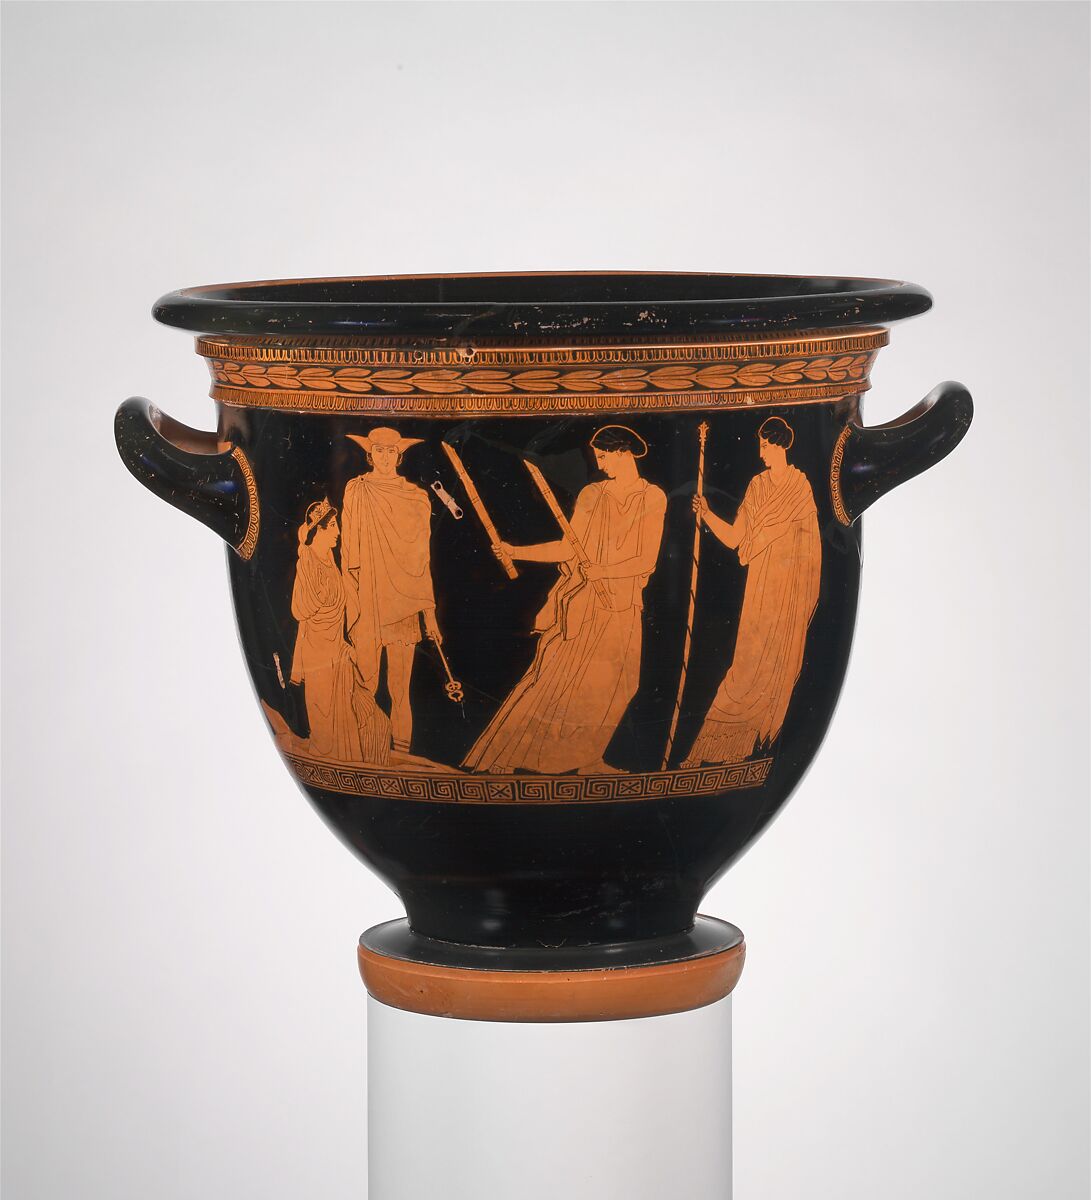 Terracotta bell-krater (bowl for mixing wine and water)